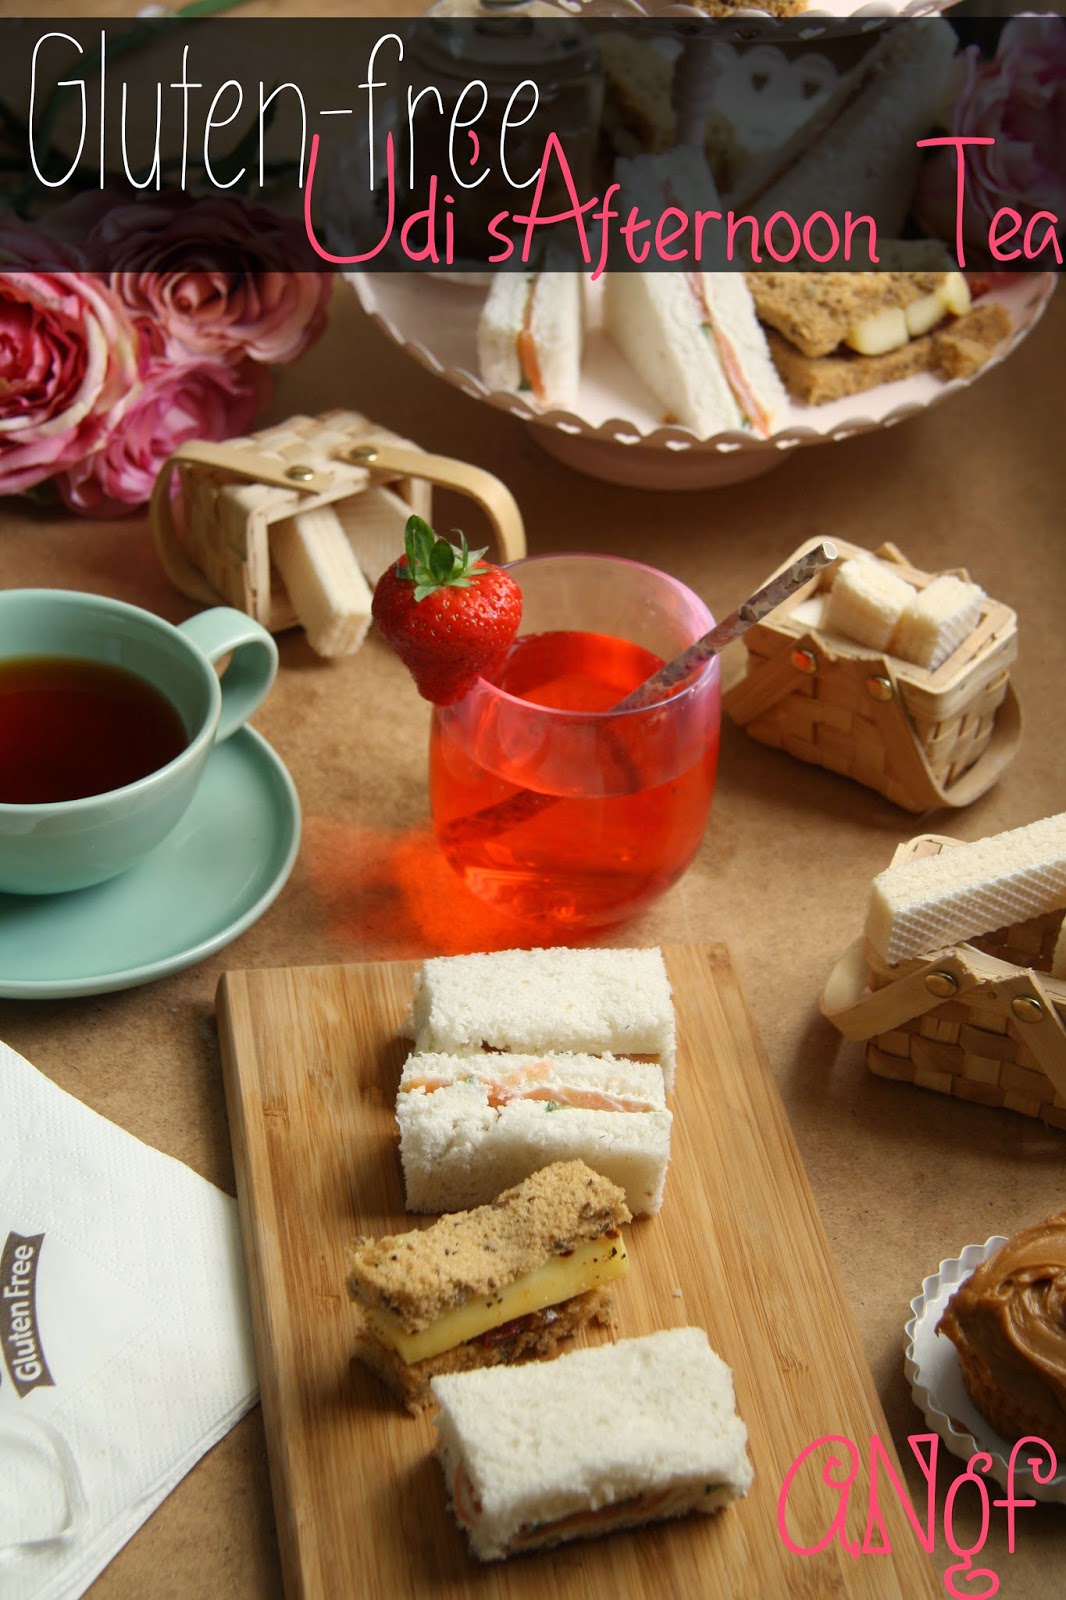 Gluten-free Afternoon Tea with Udi's from Anyonita-nibbles.co.uk